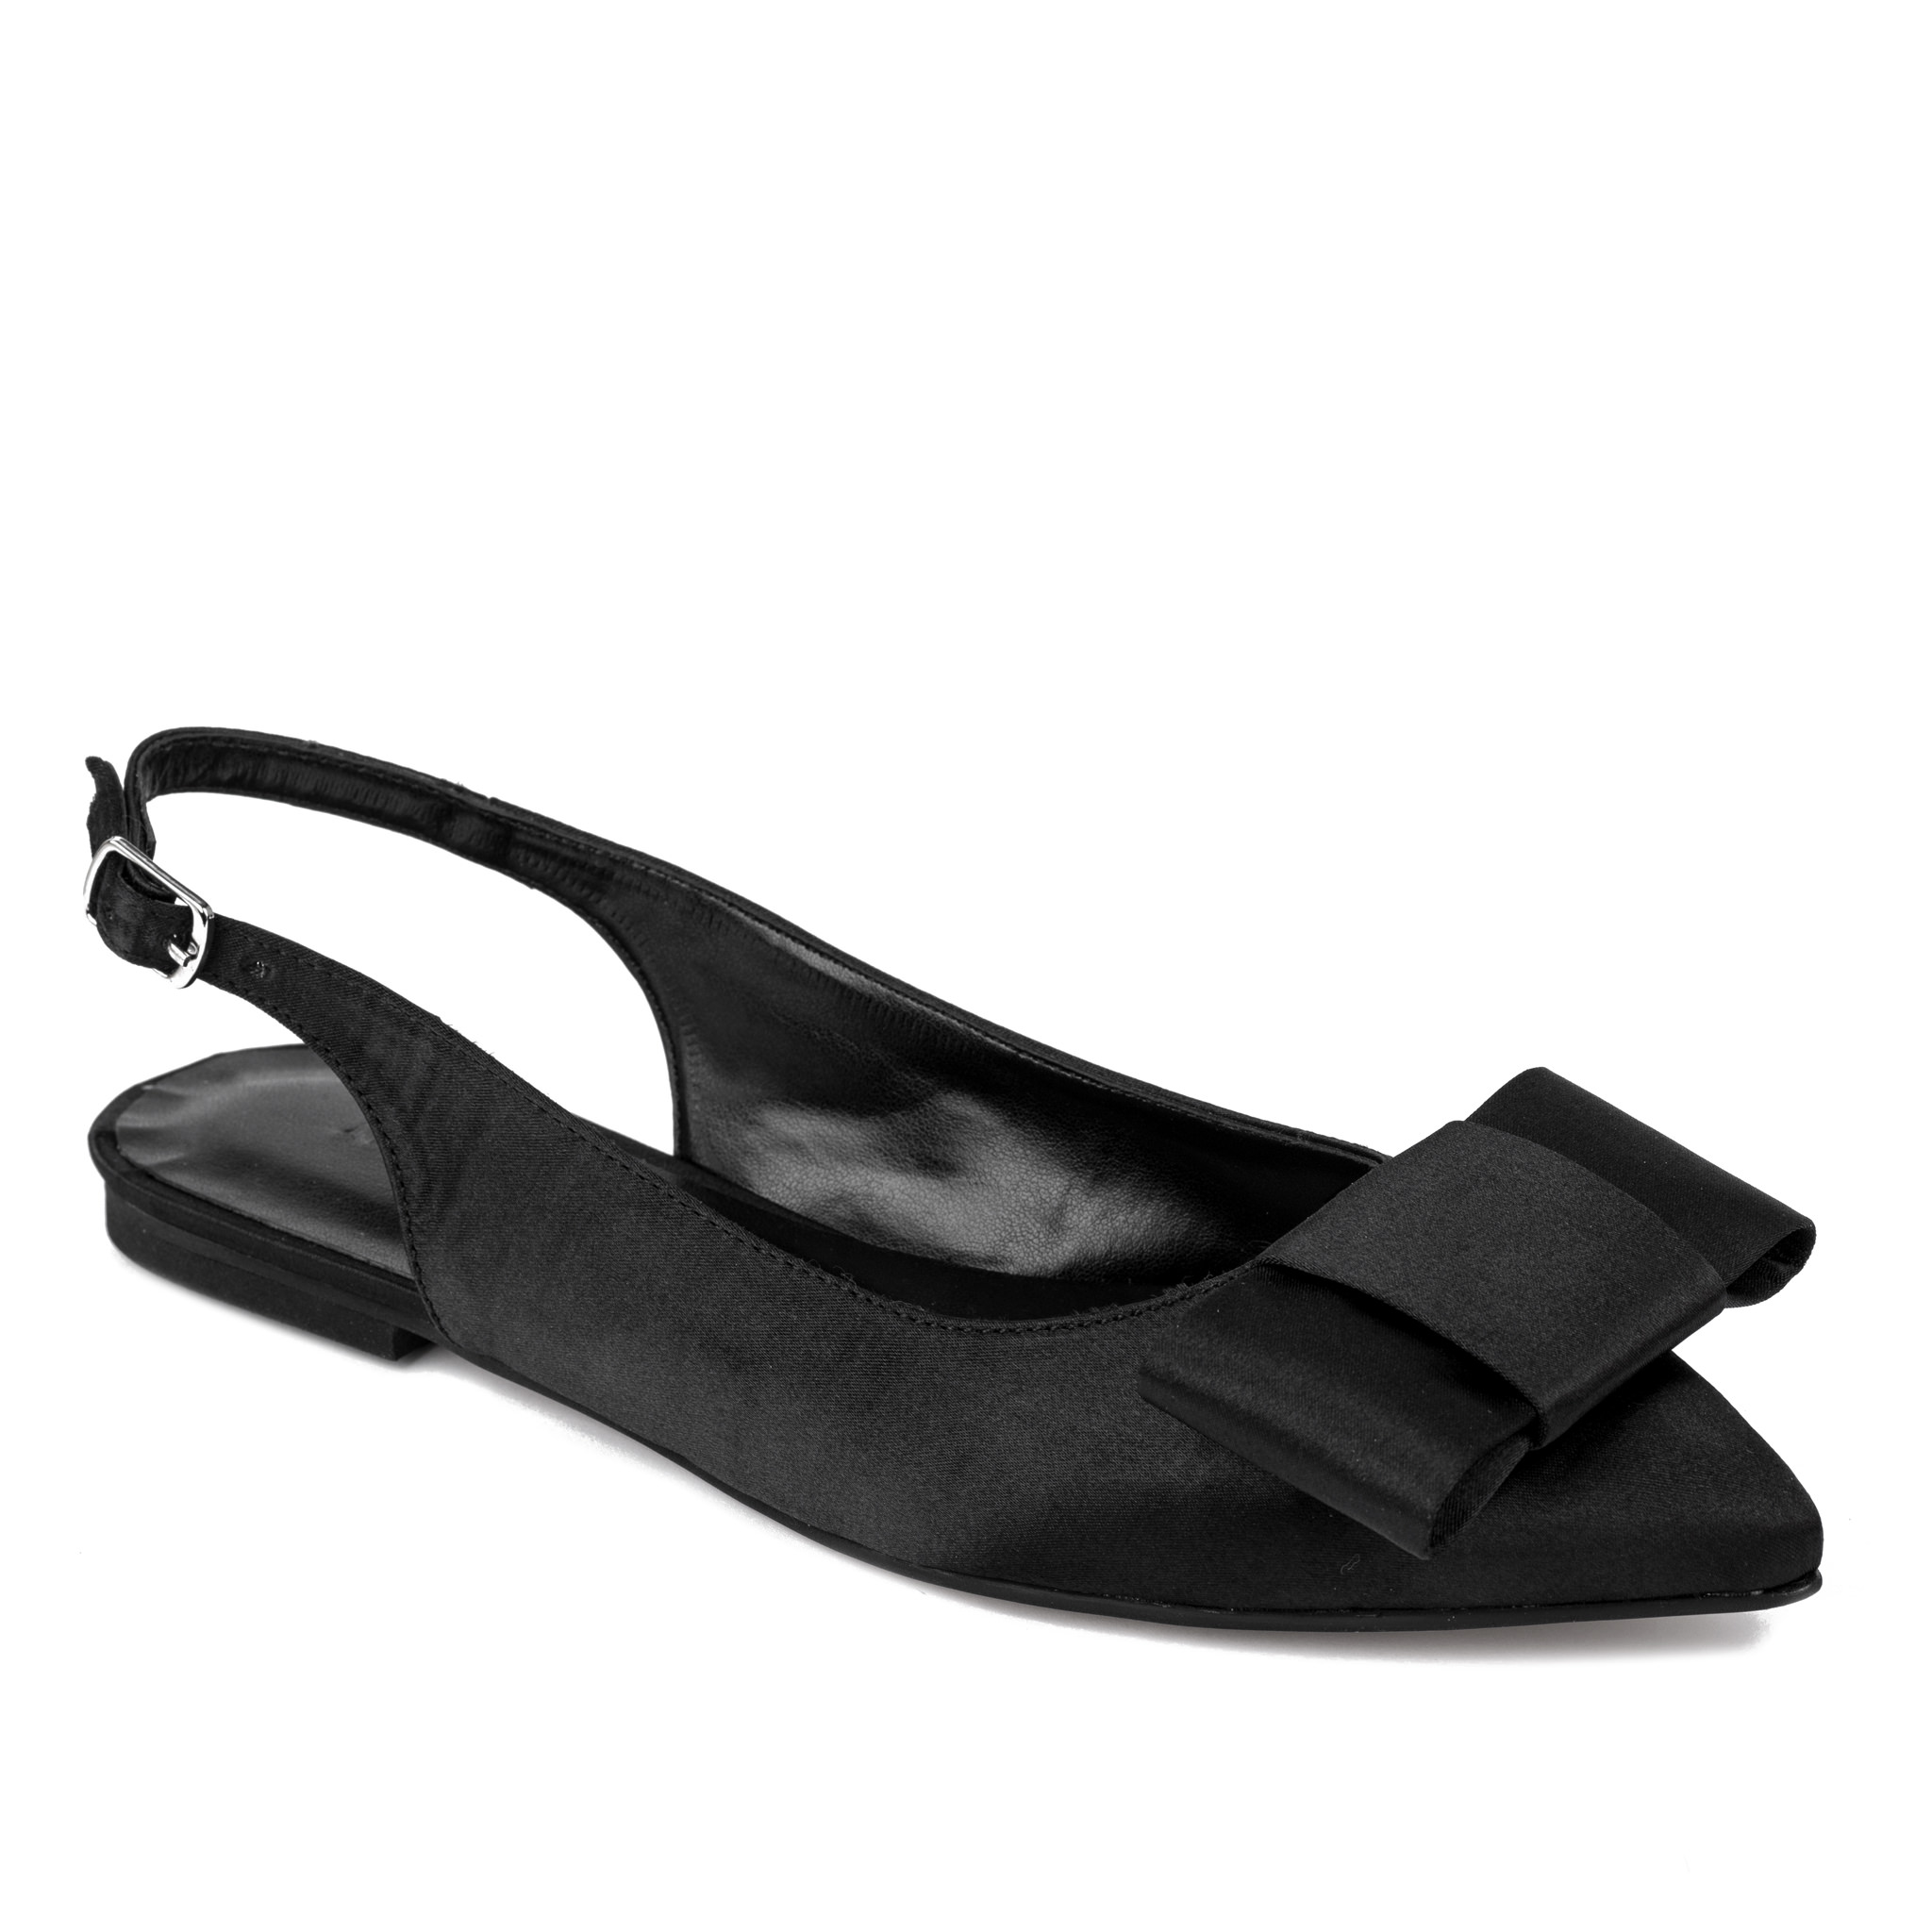 SATIN SANDALS WITH BOW - BLACK